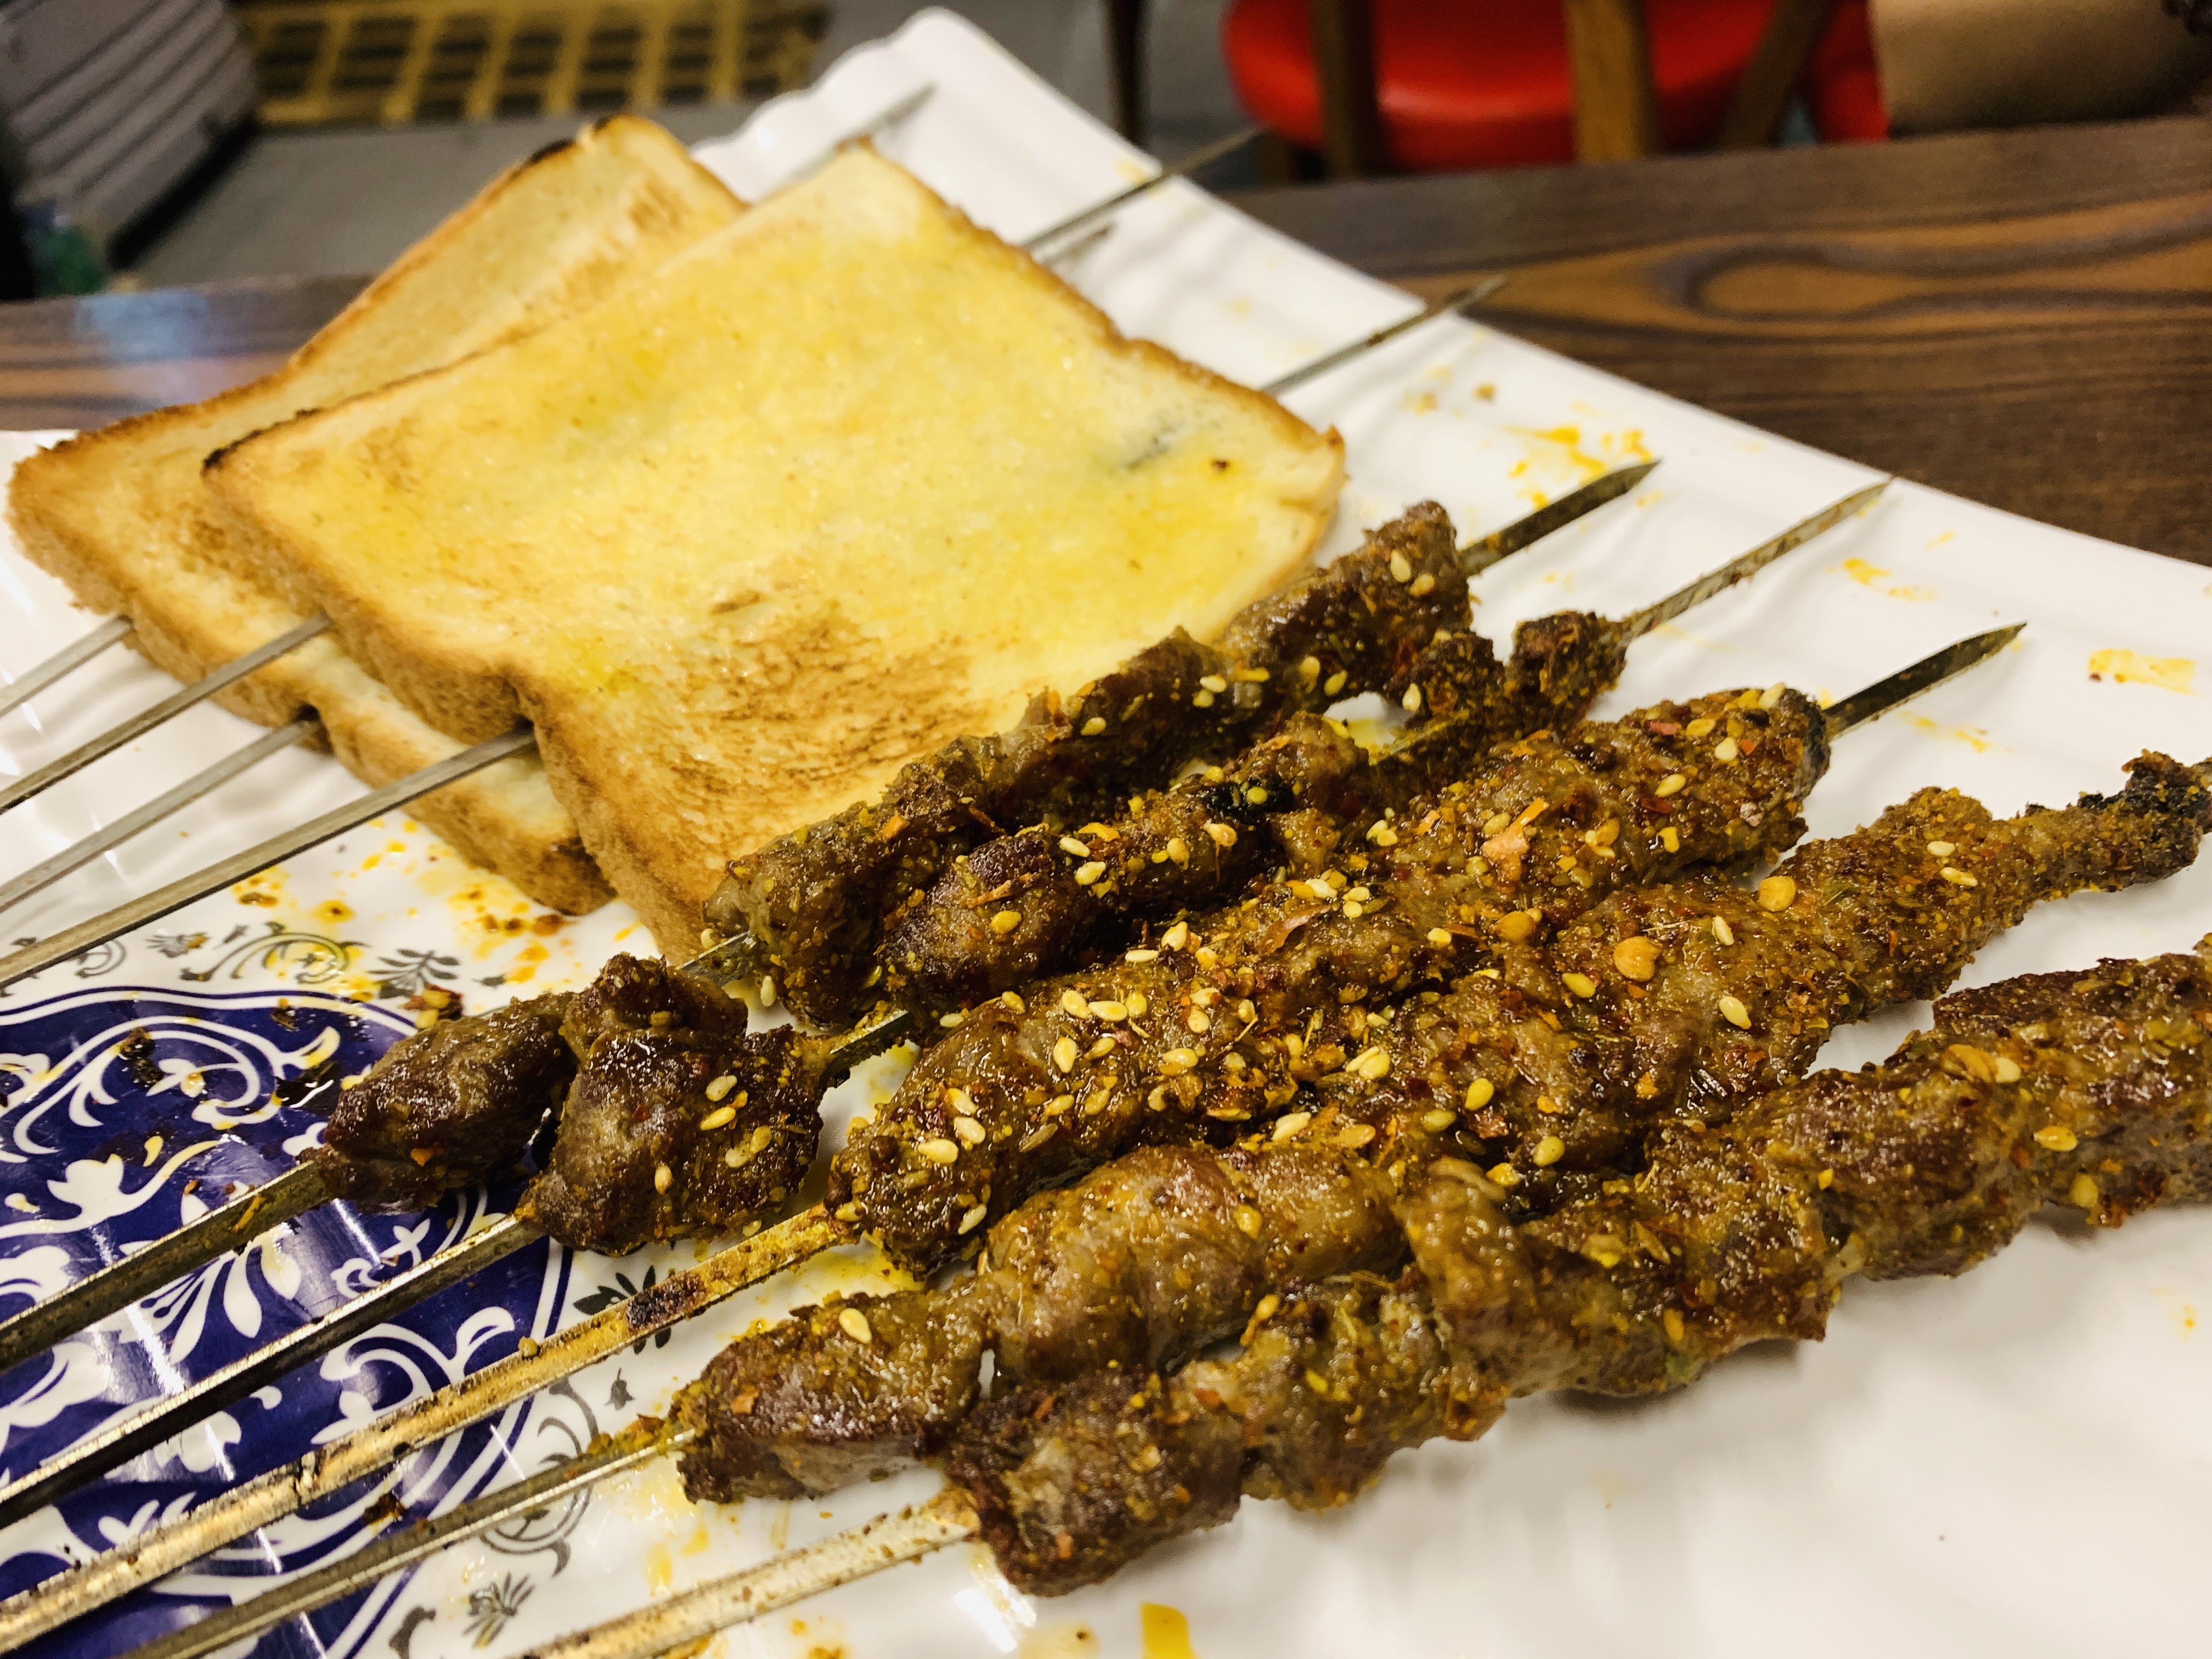 Xiao Yao Ge - Grill Fresh Mutton and Grill Bread Slice